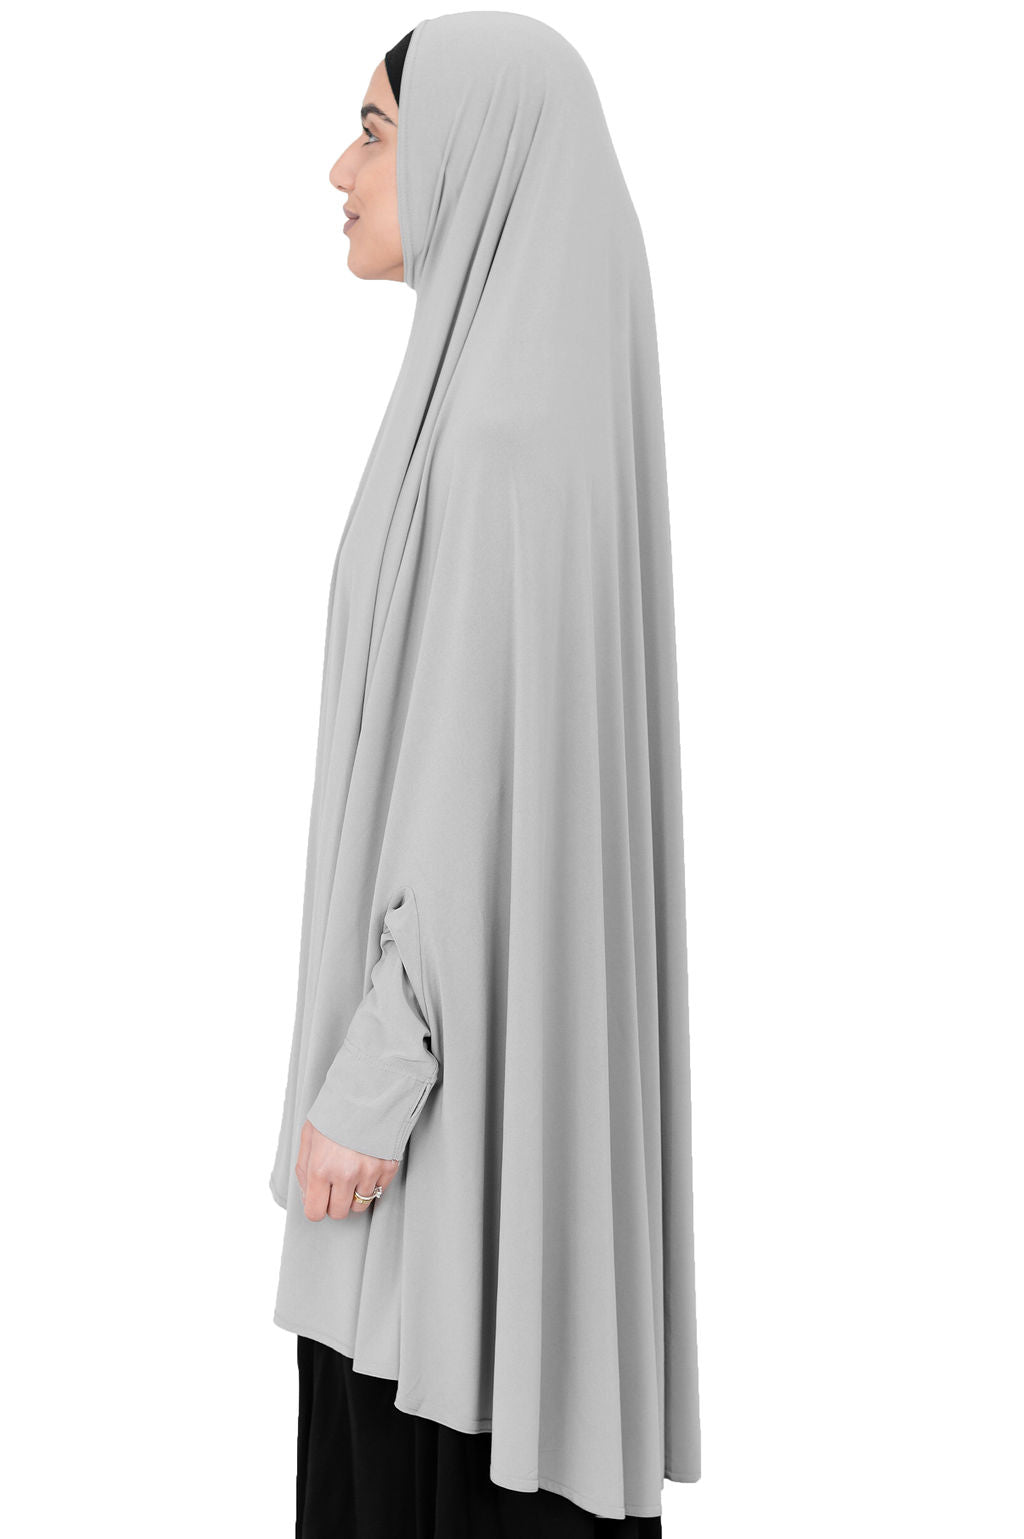 Standard Length Sleeved Jelbab in Silver Grey - Behind The Veil